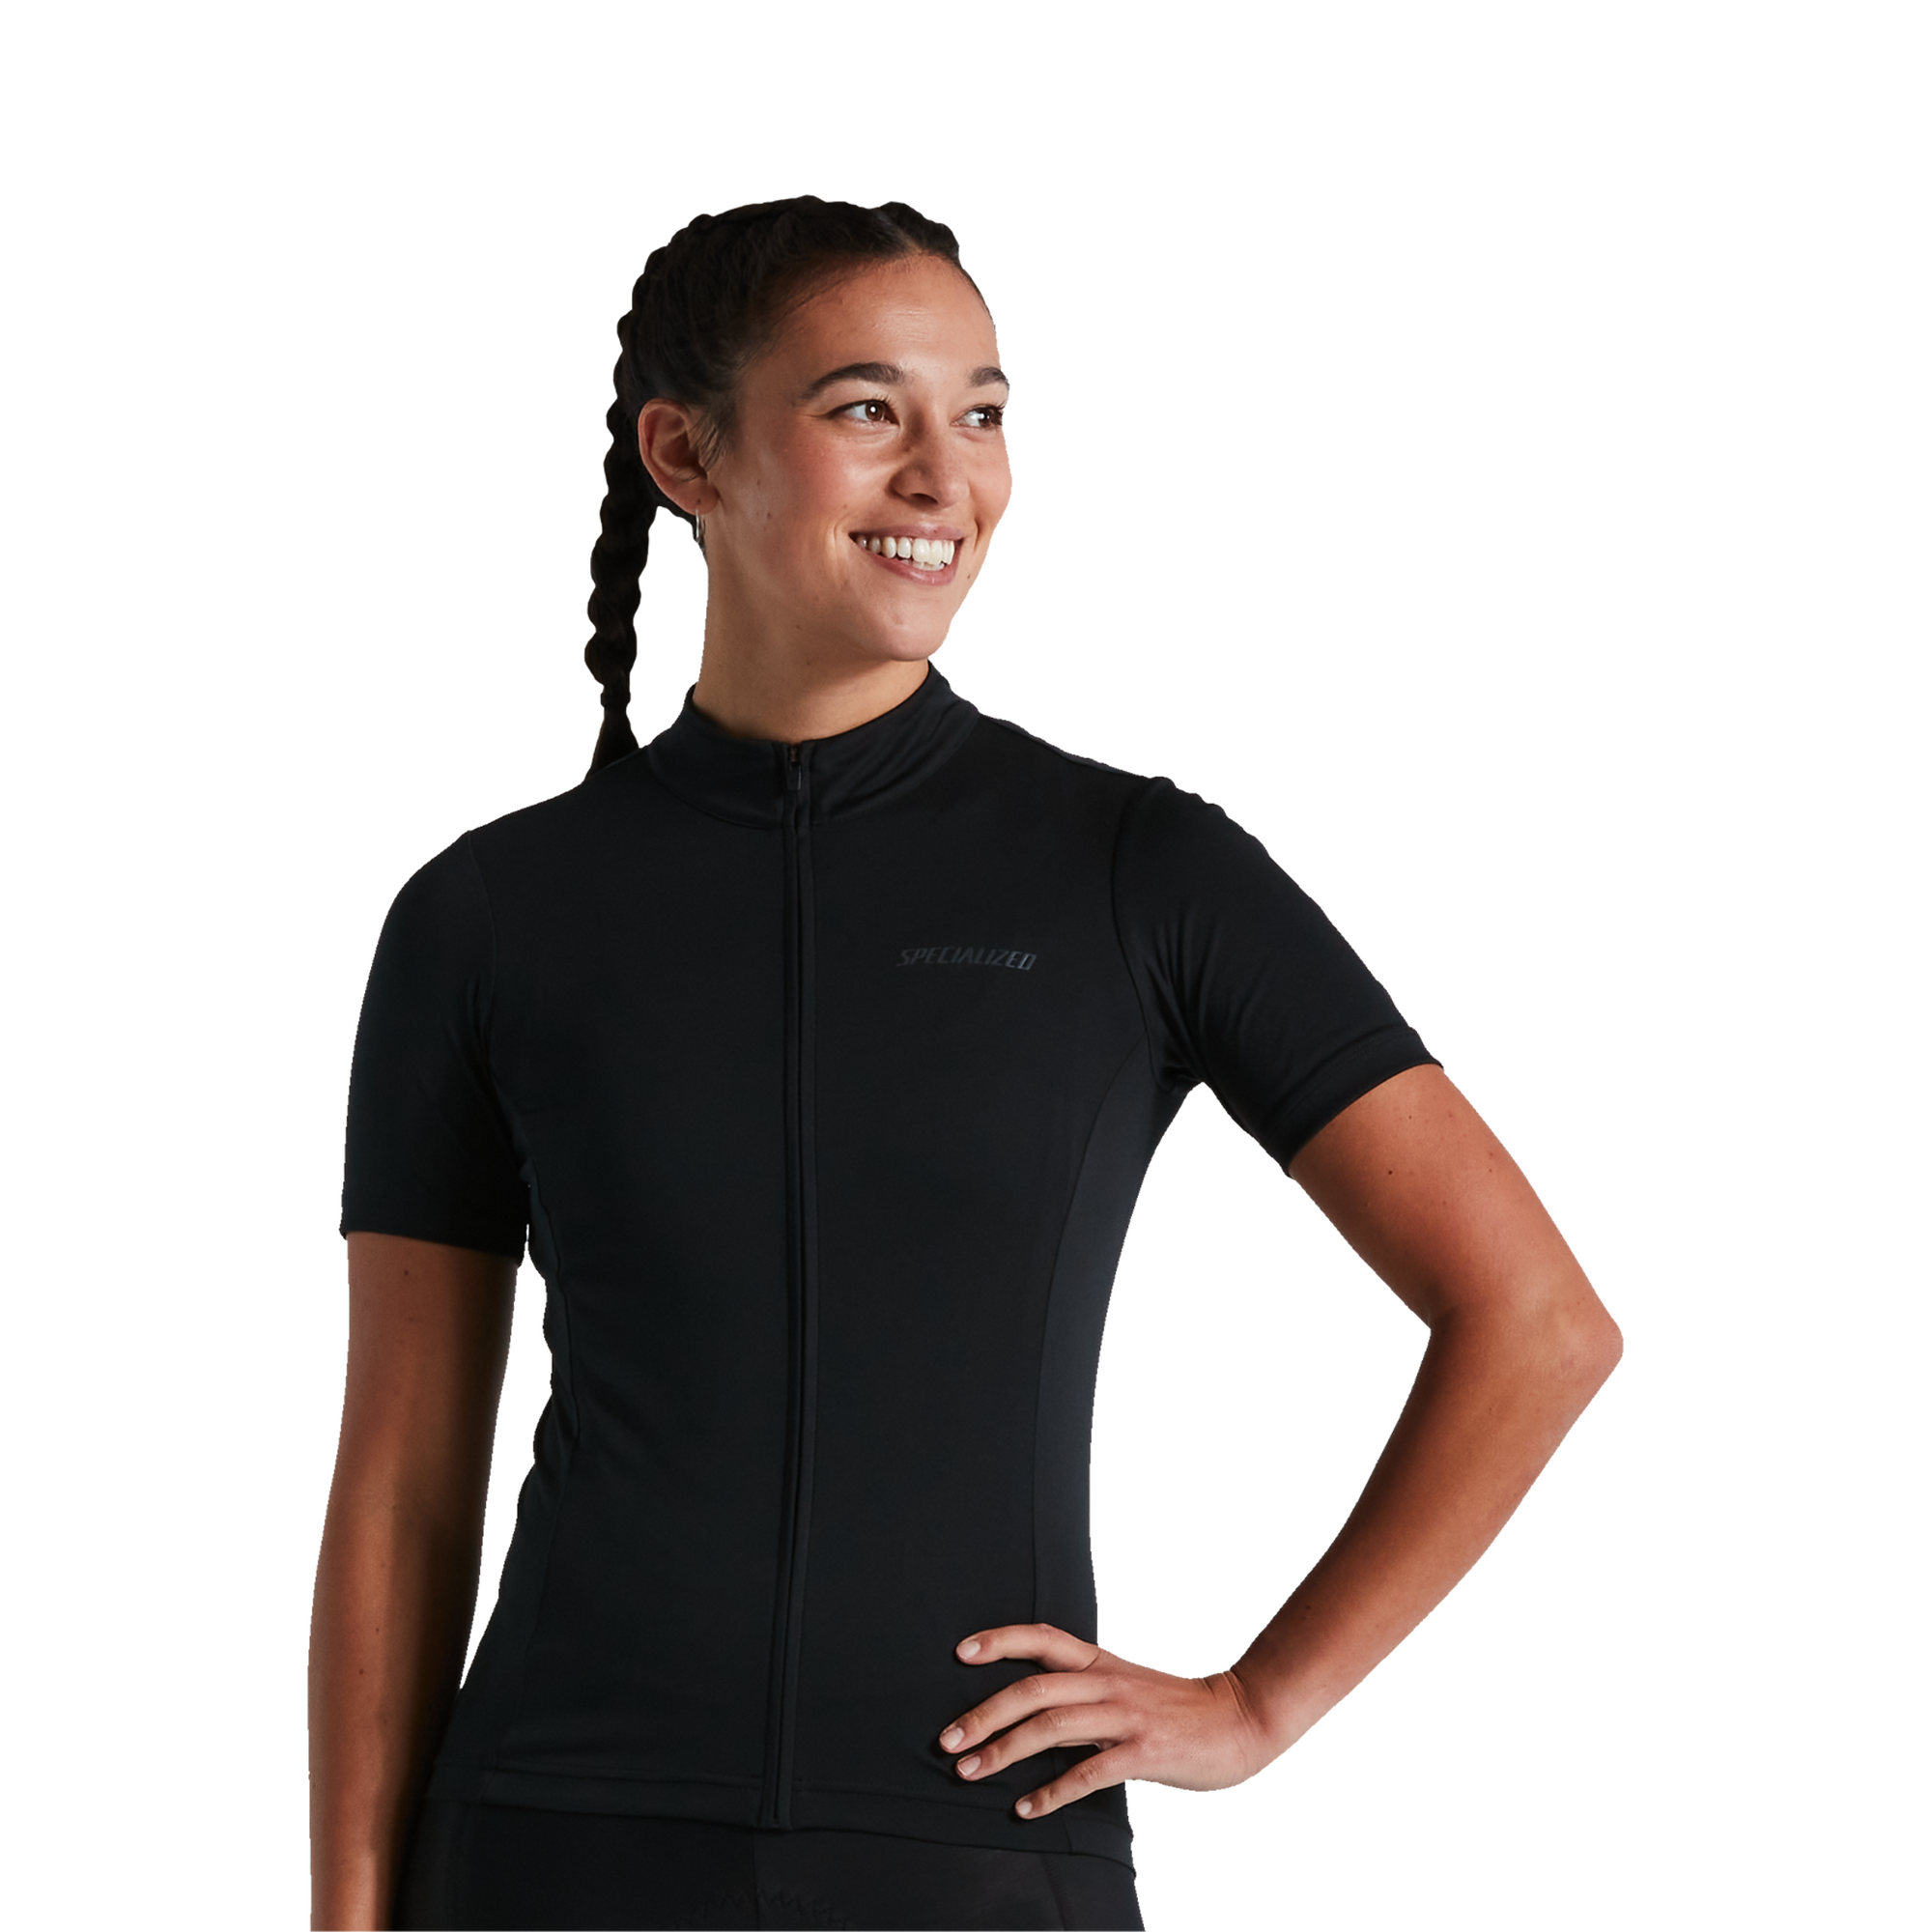 Specialized Women's RBX Mirage Short Sleeve Jersey - Michael's Bicycles